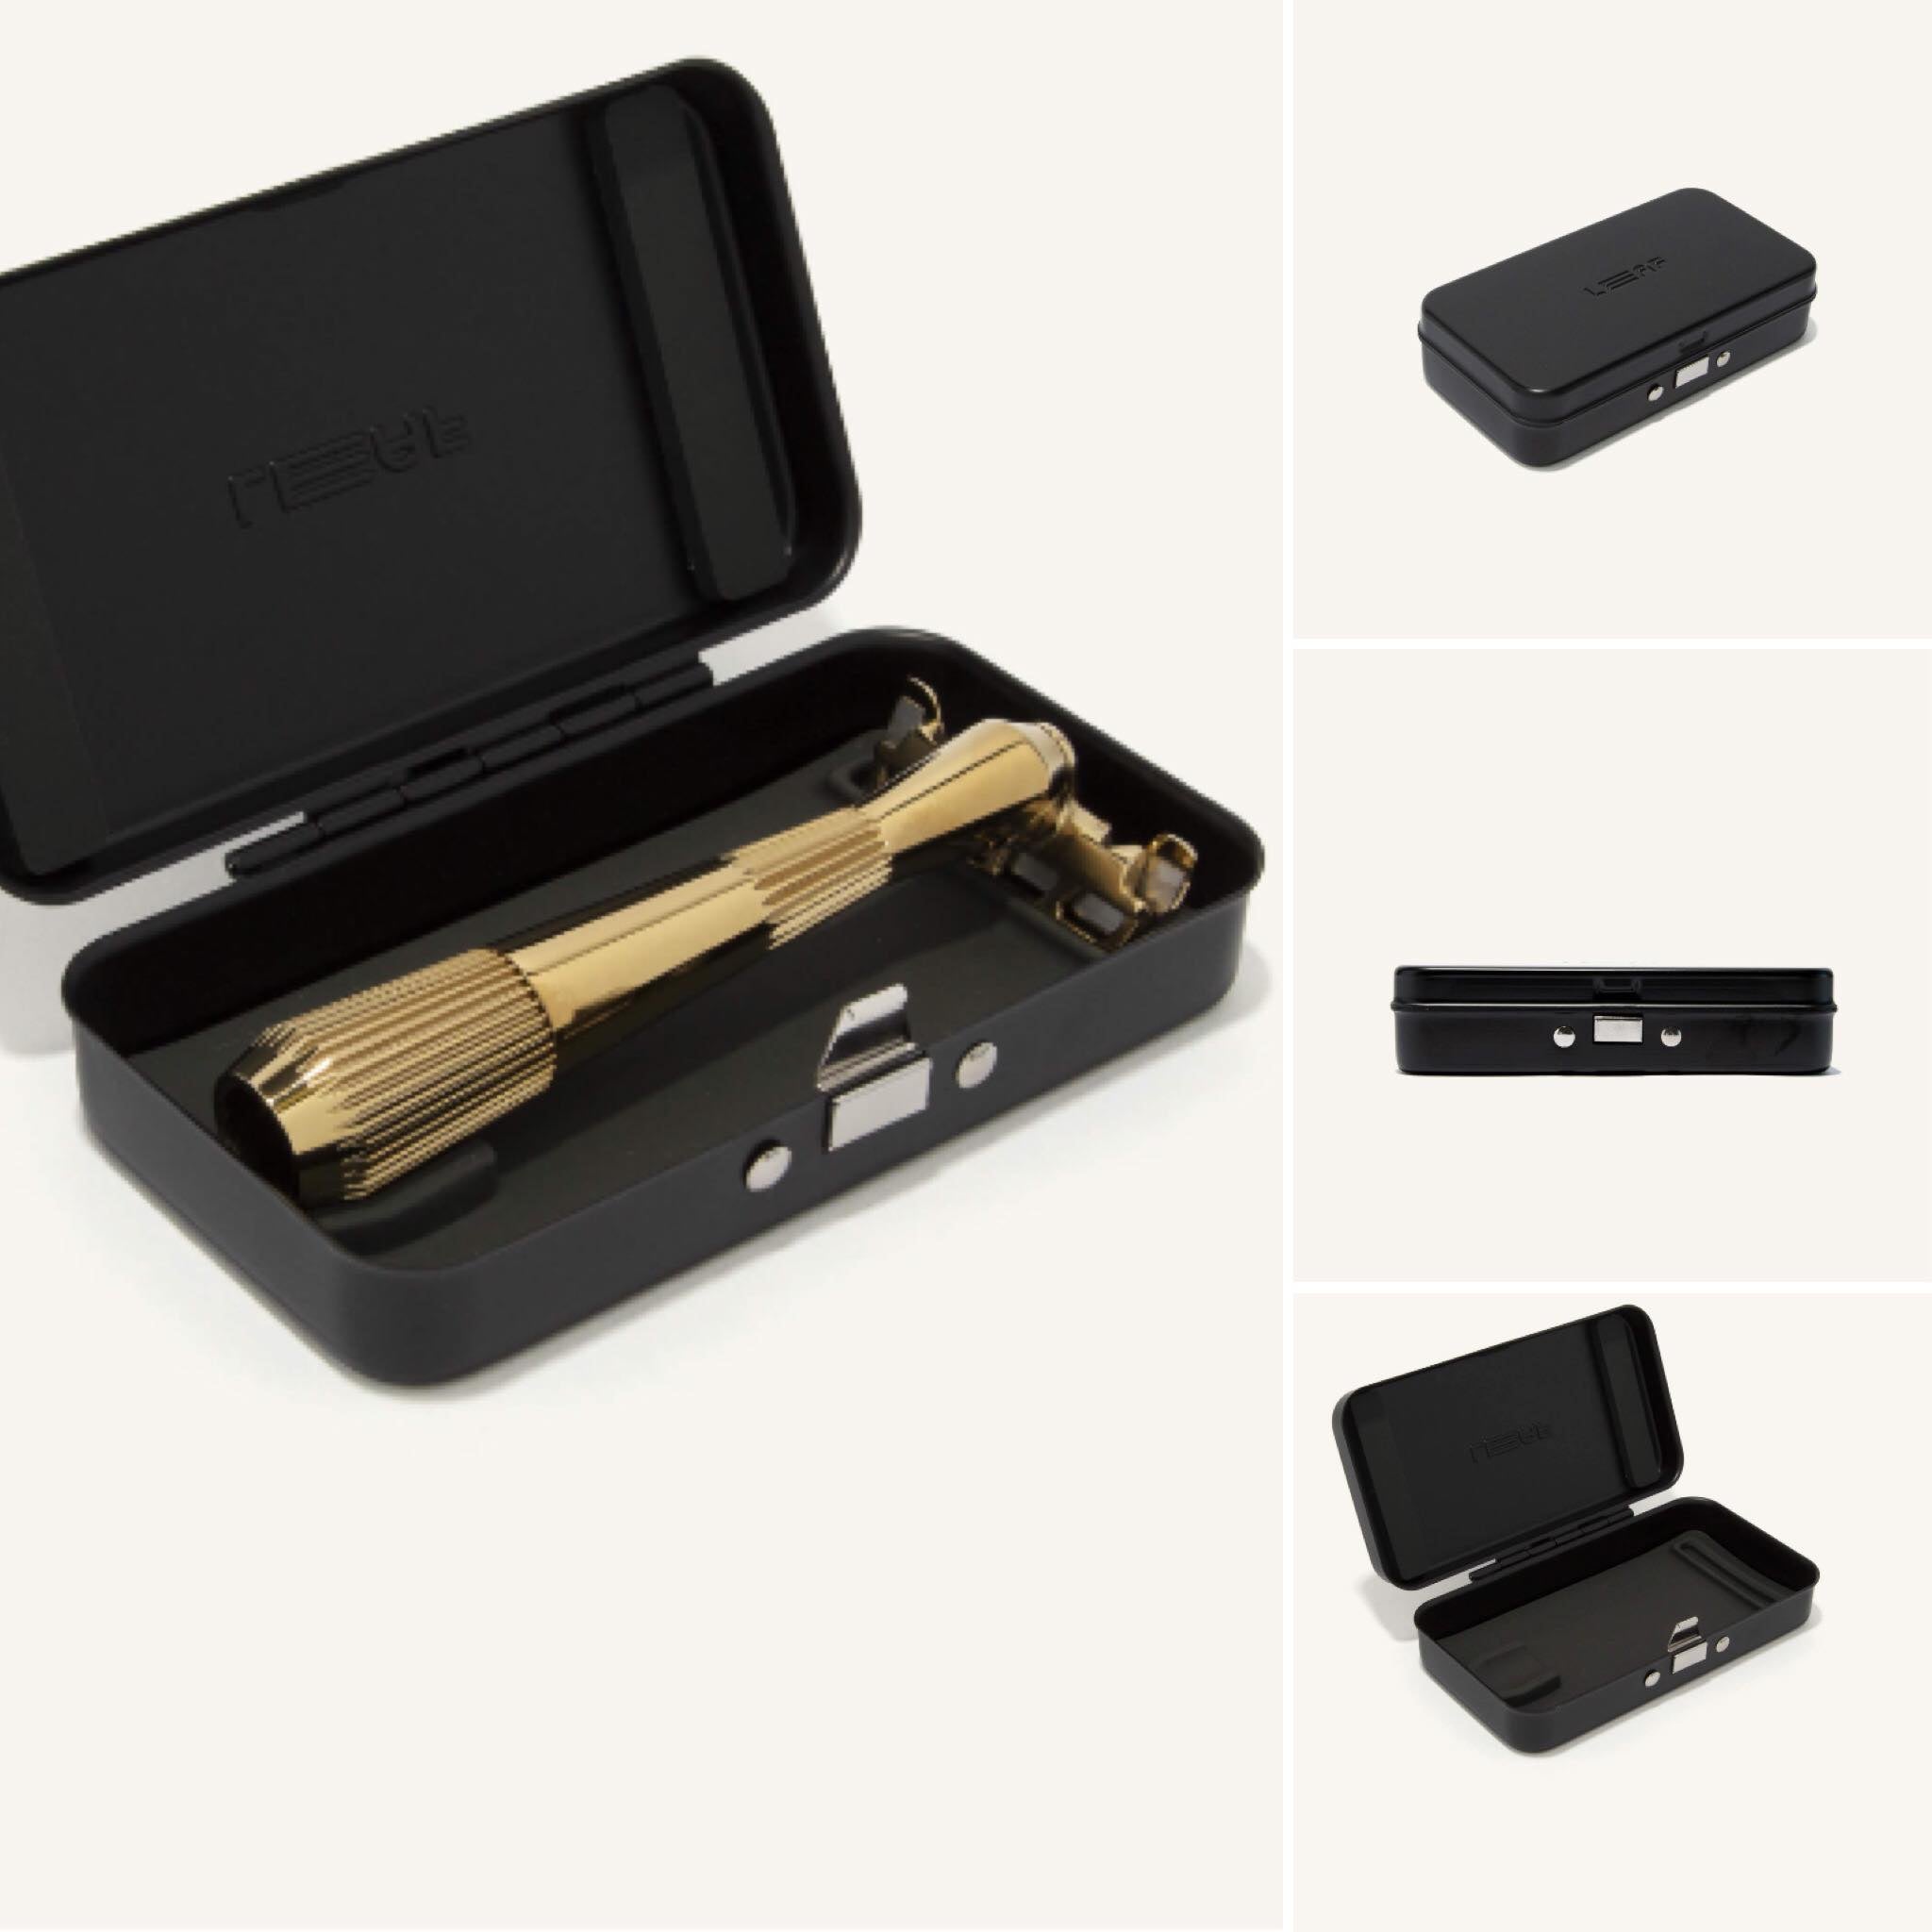 Protect your single-edge Twig Razor by Leaf Shave with The Twig Case 'black' while you move about with this custom hard-case.